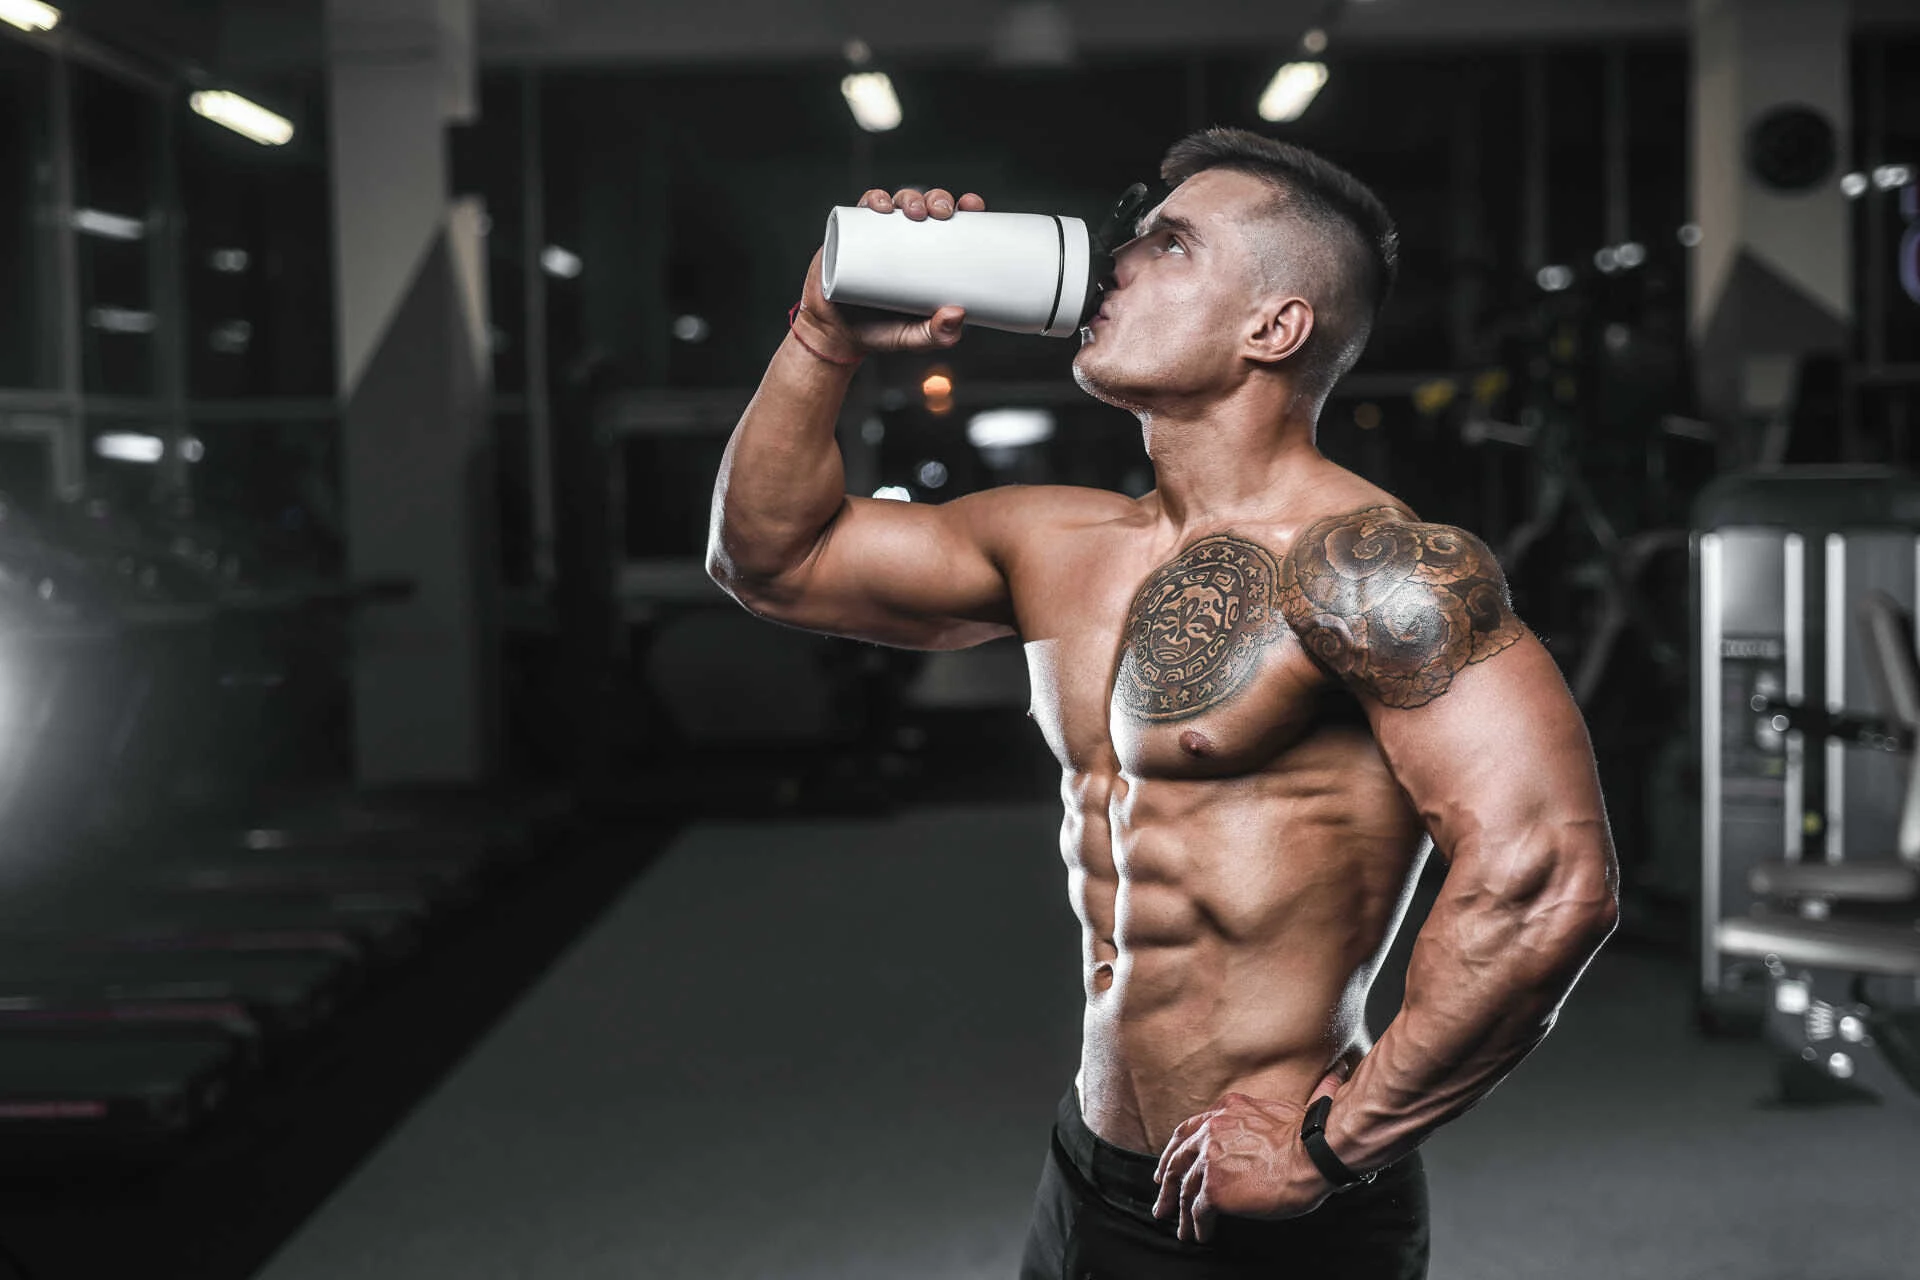 How to apply Turanabol